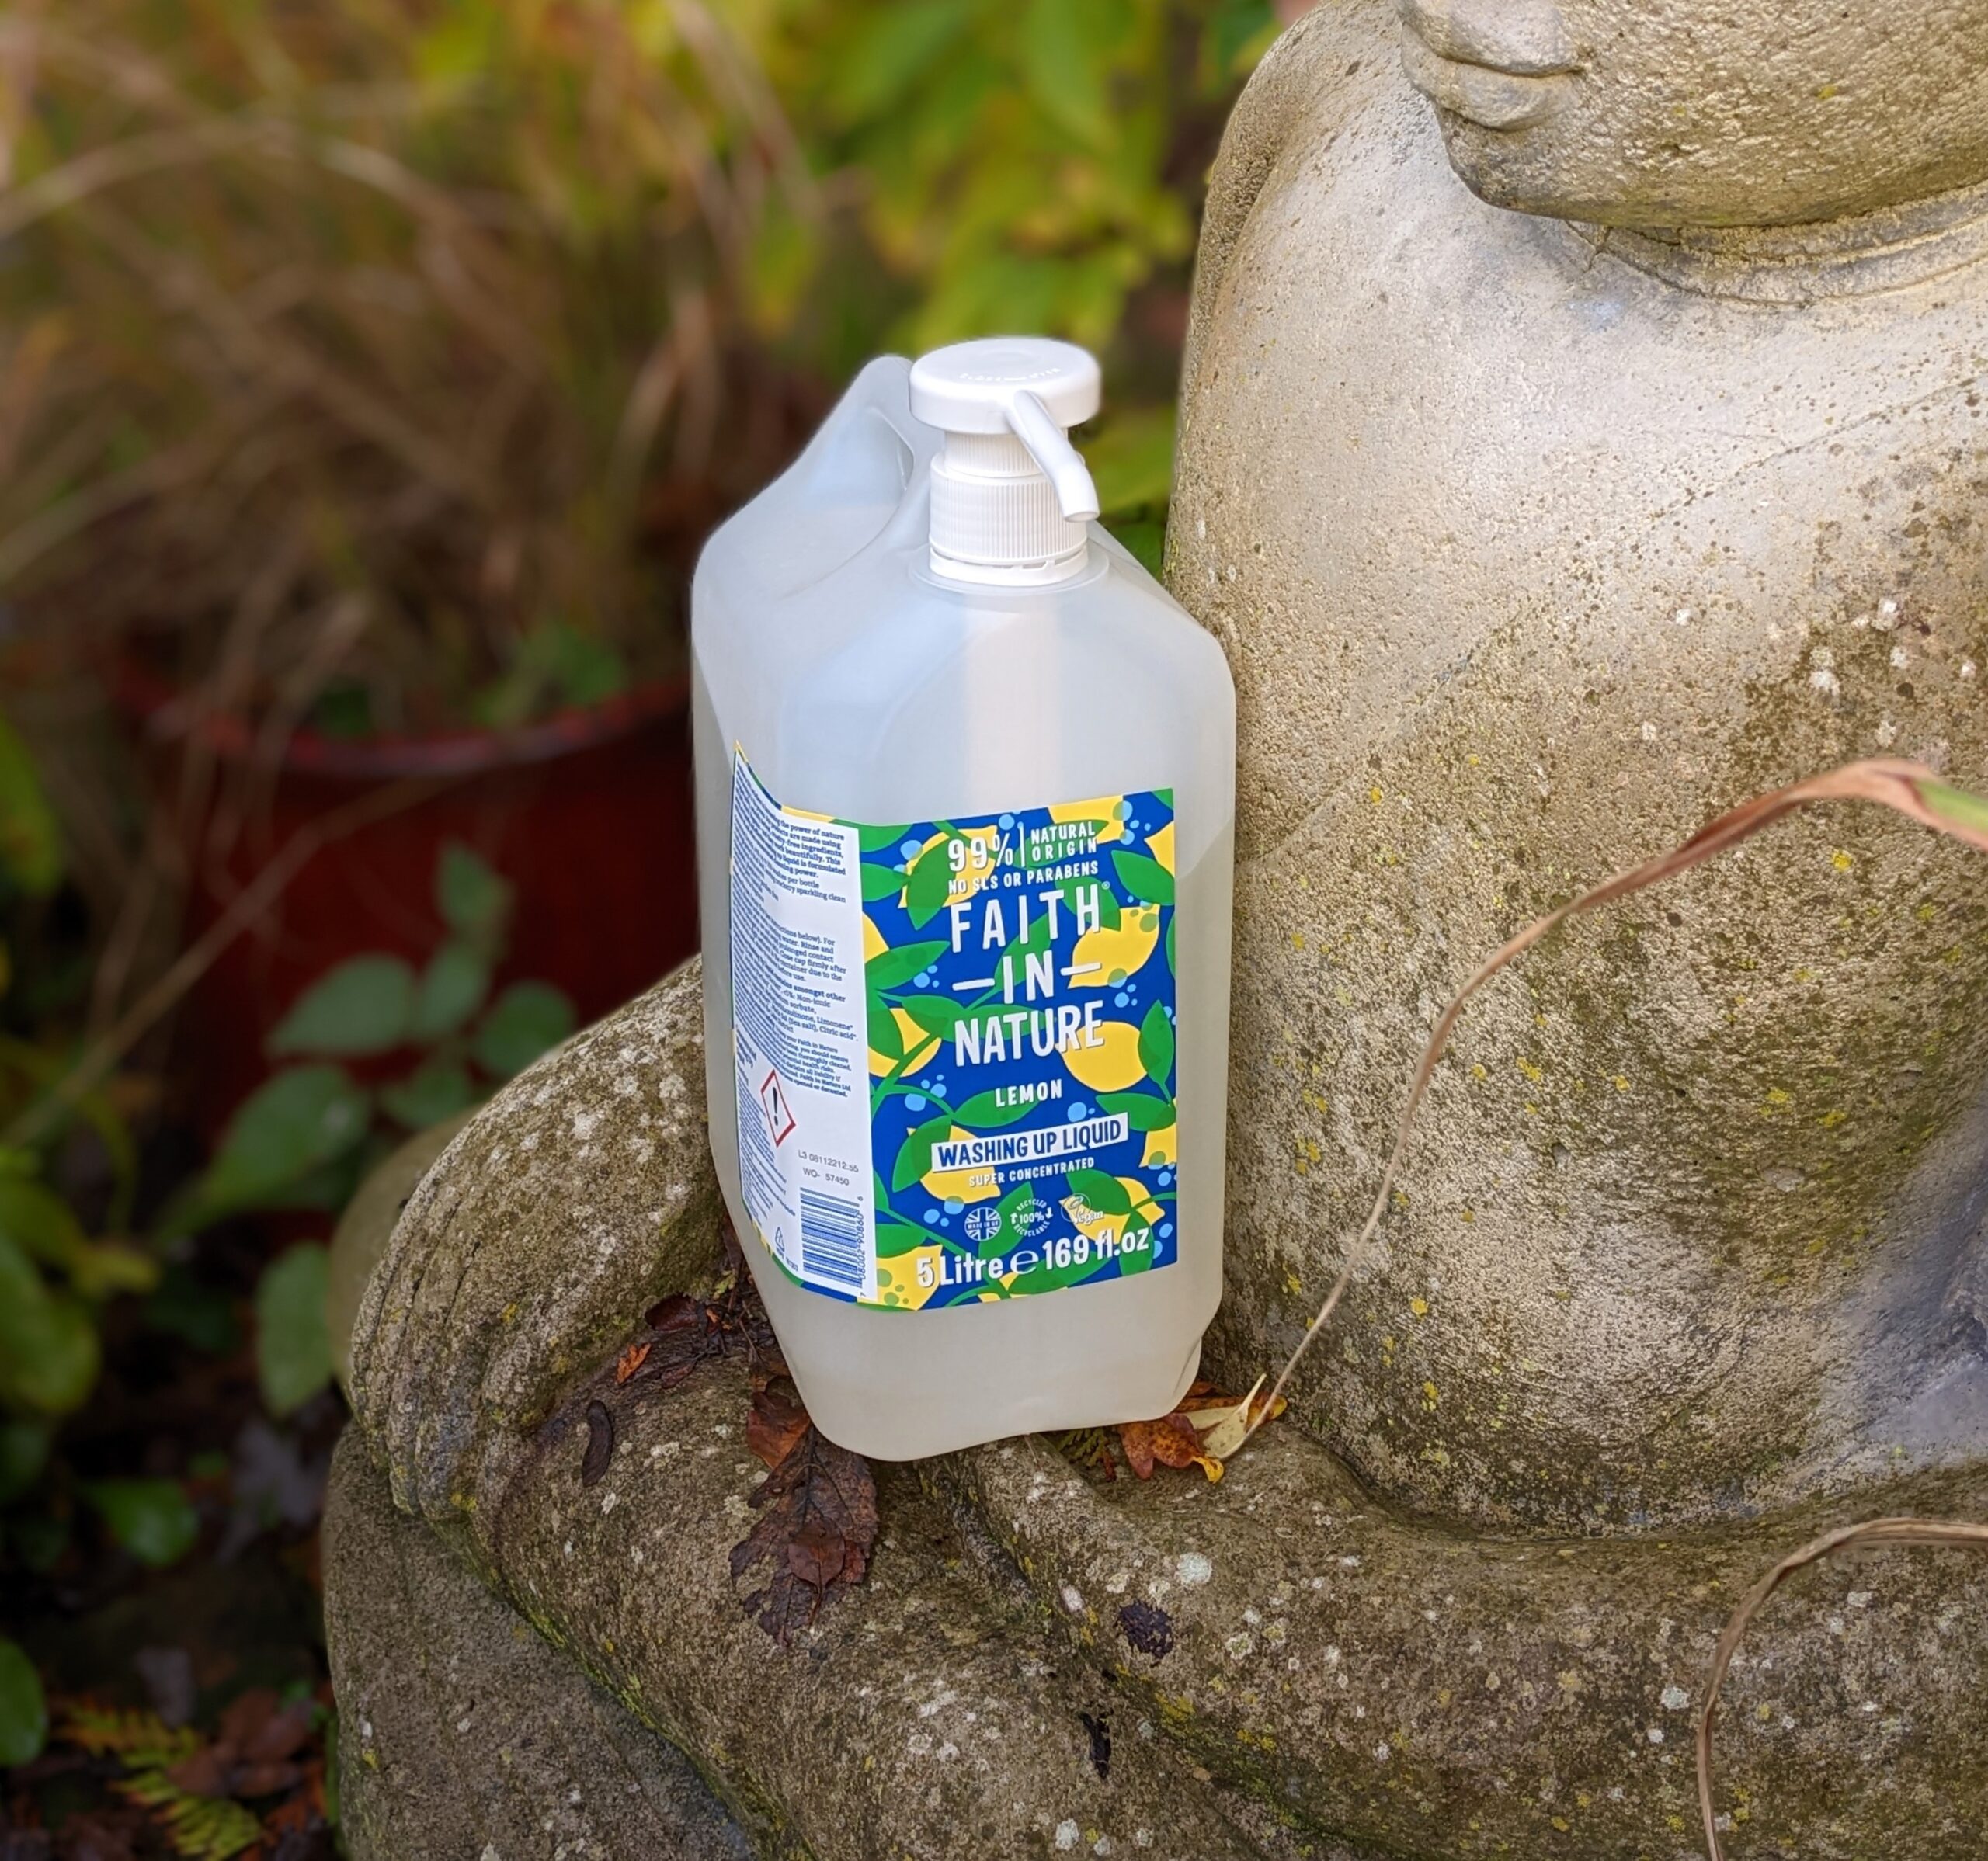 5 litre plastic bottle of Faith in Nature Vegan washing up liquid sitting on a statue of Buddha